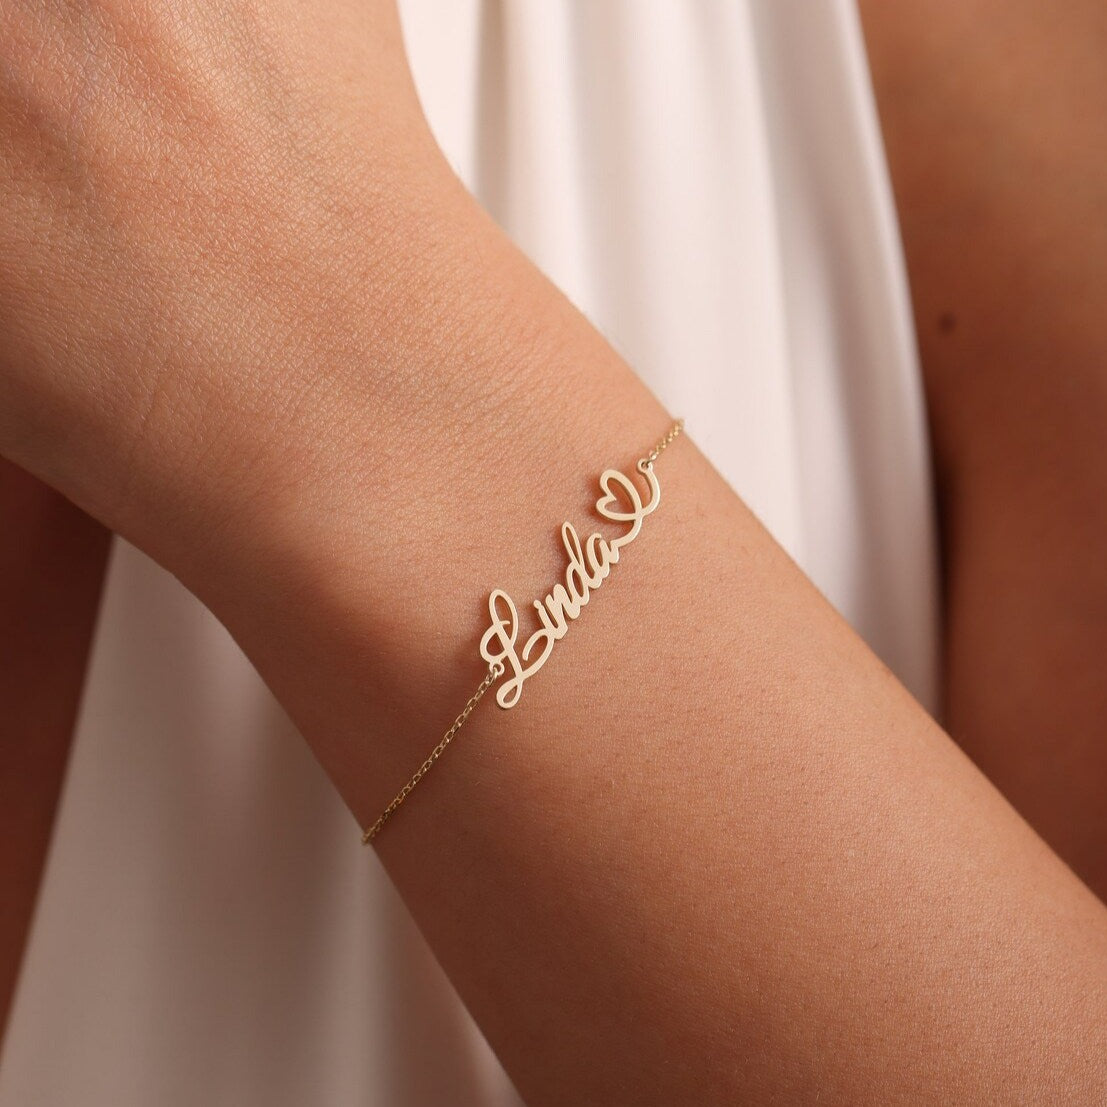 Shop Exquisite Gold Name Bracelets in Dubai & UAE. Personalized with 18-Carat Gold. Perfect for Gifts & Occasions. 